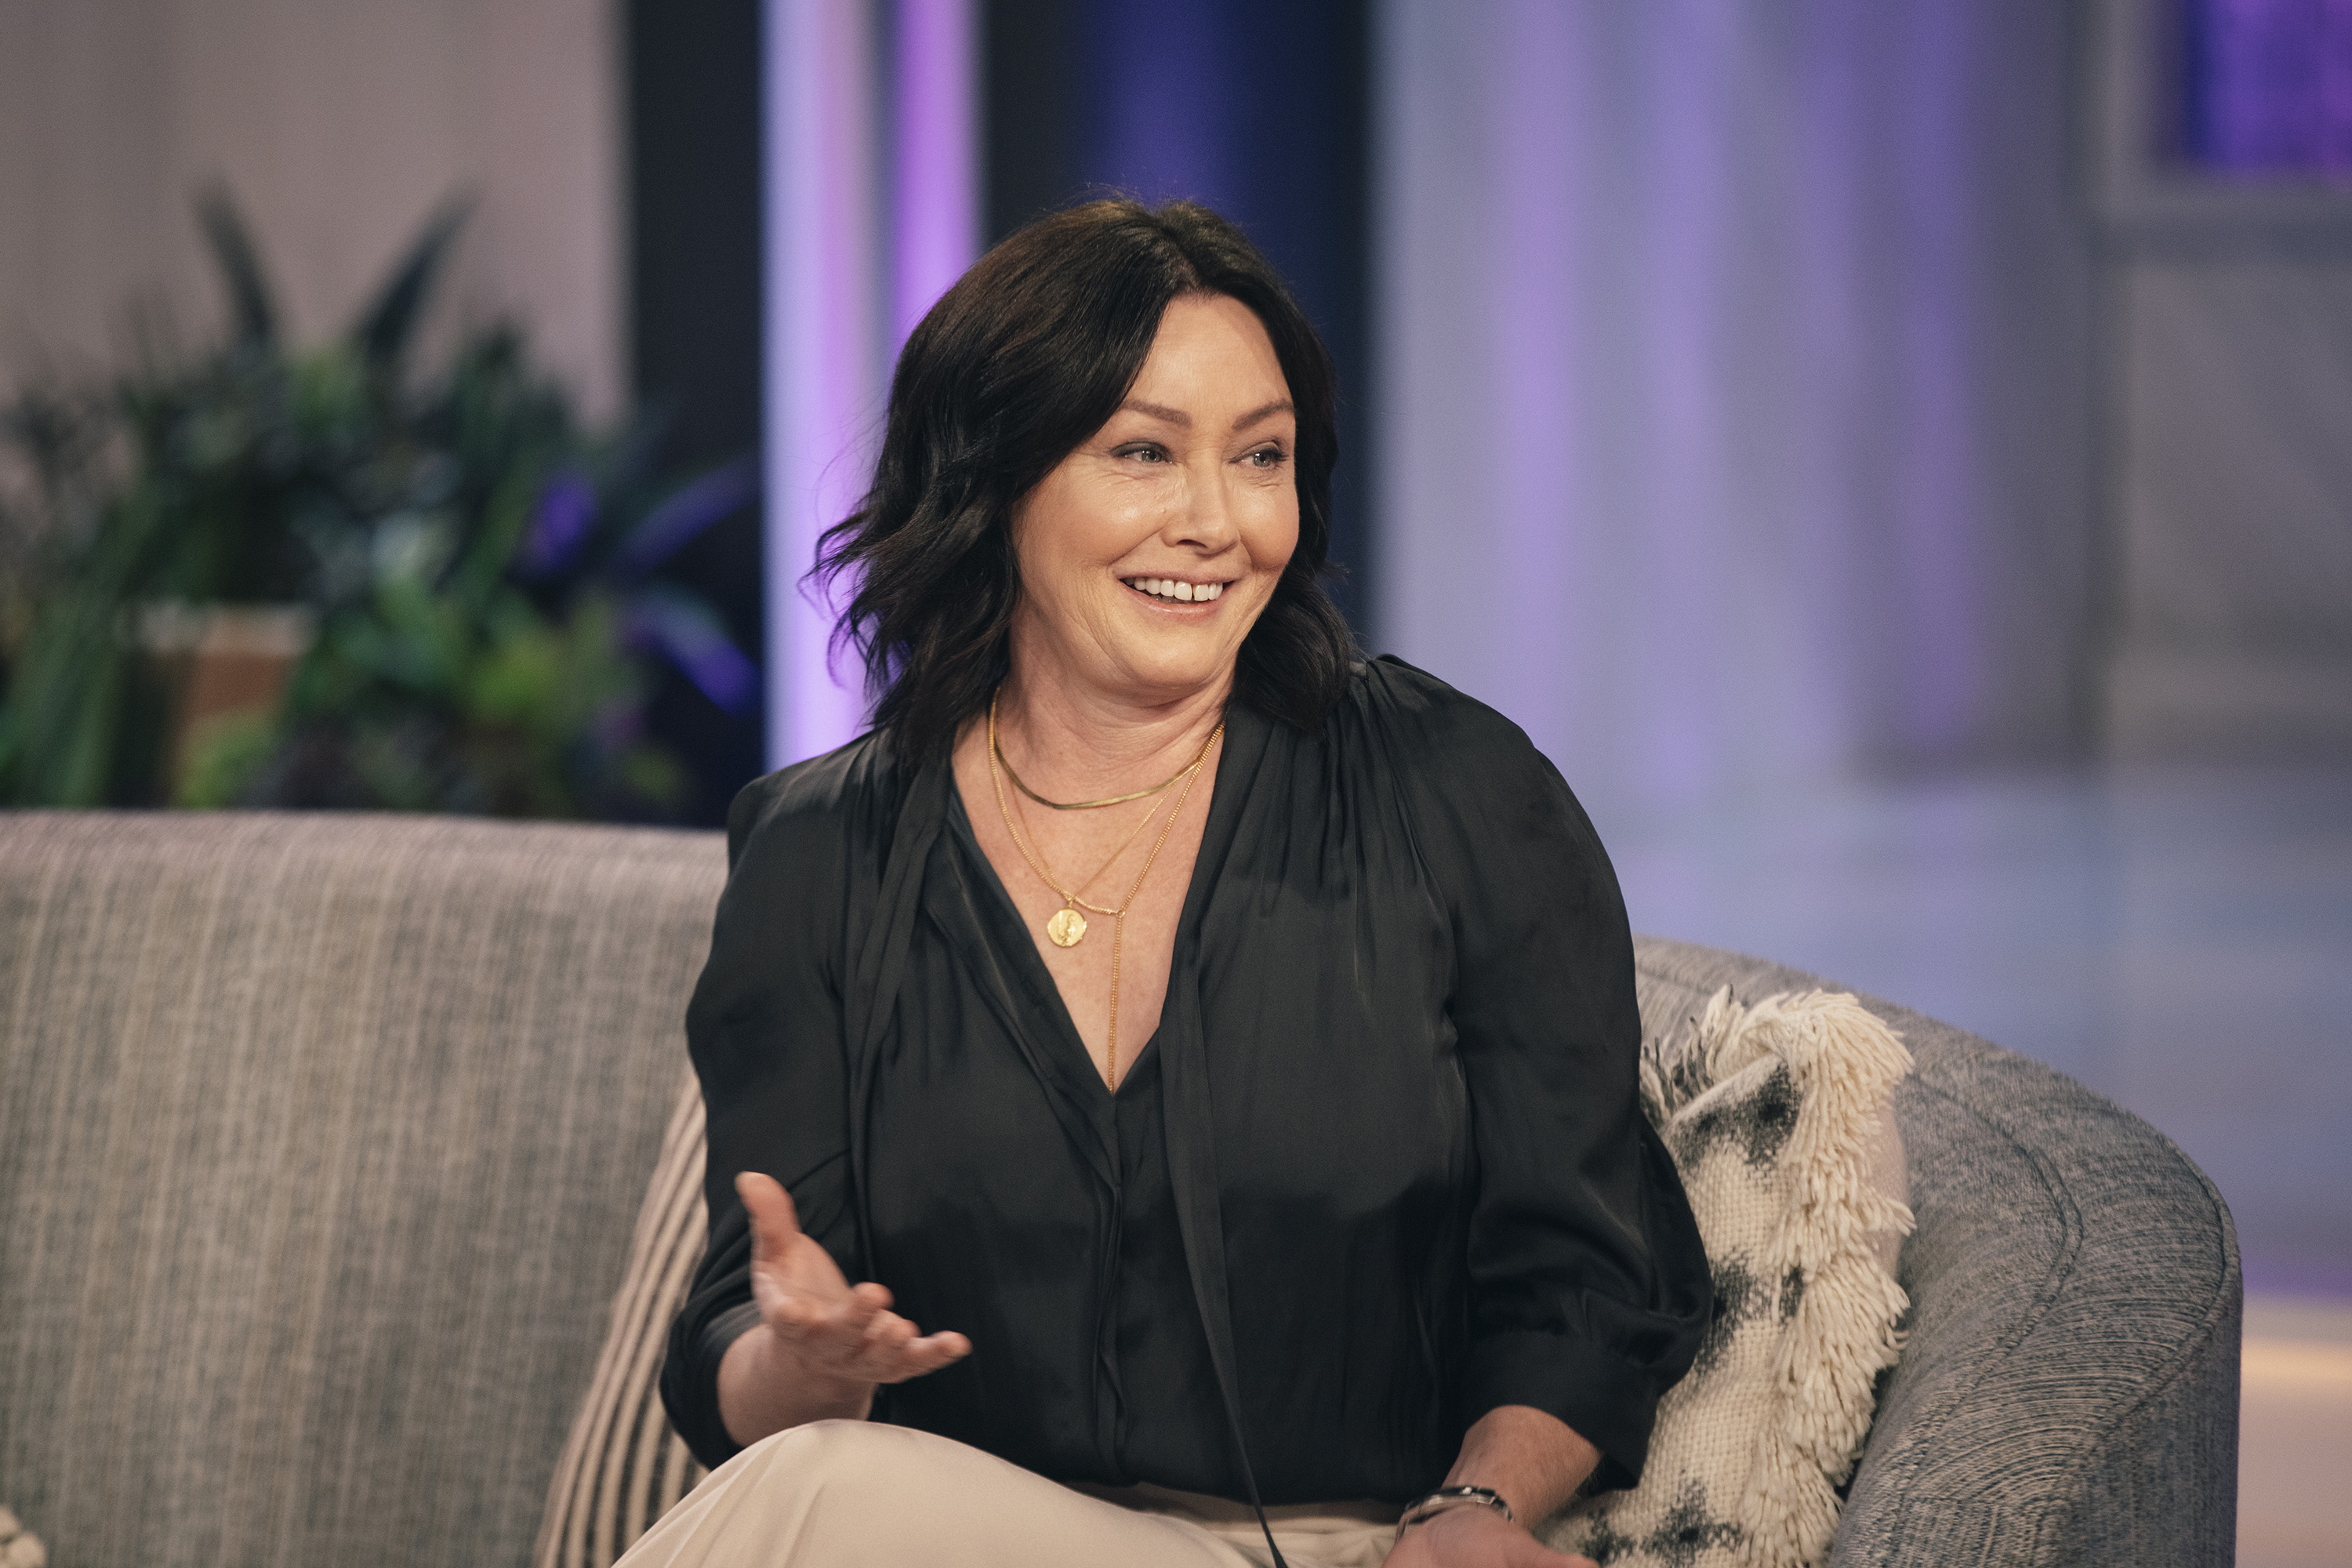 Shannen Doherty on season 3 of "The Kelly Clarkson Show" on September 8, 2021 | Source: Getty Images